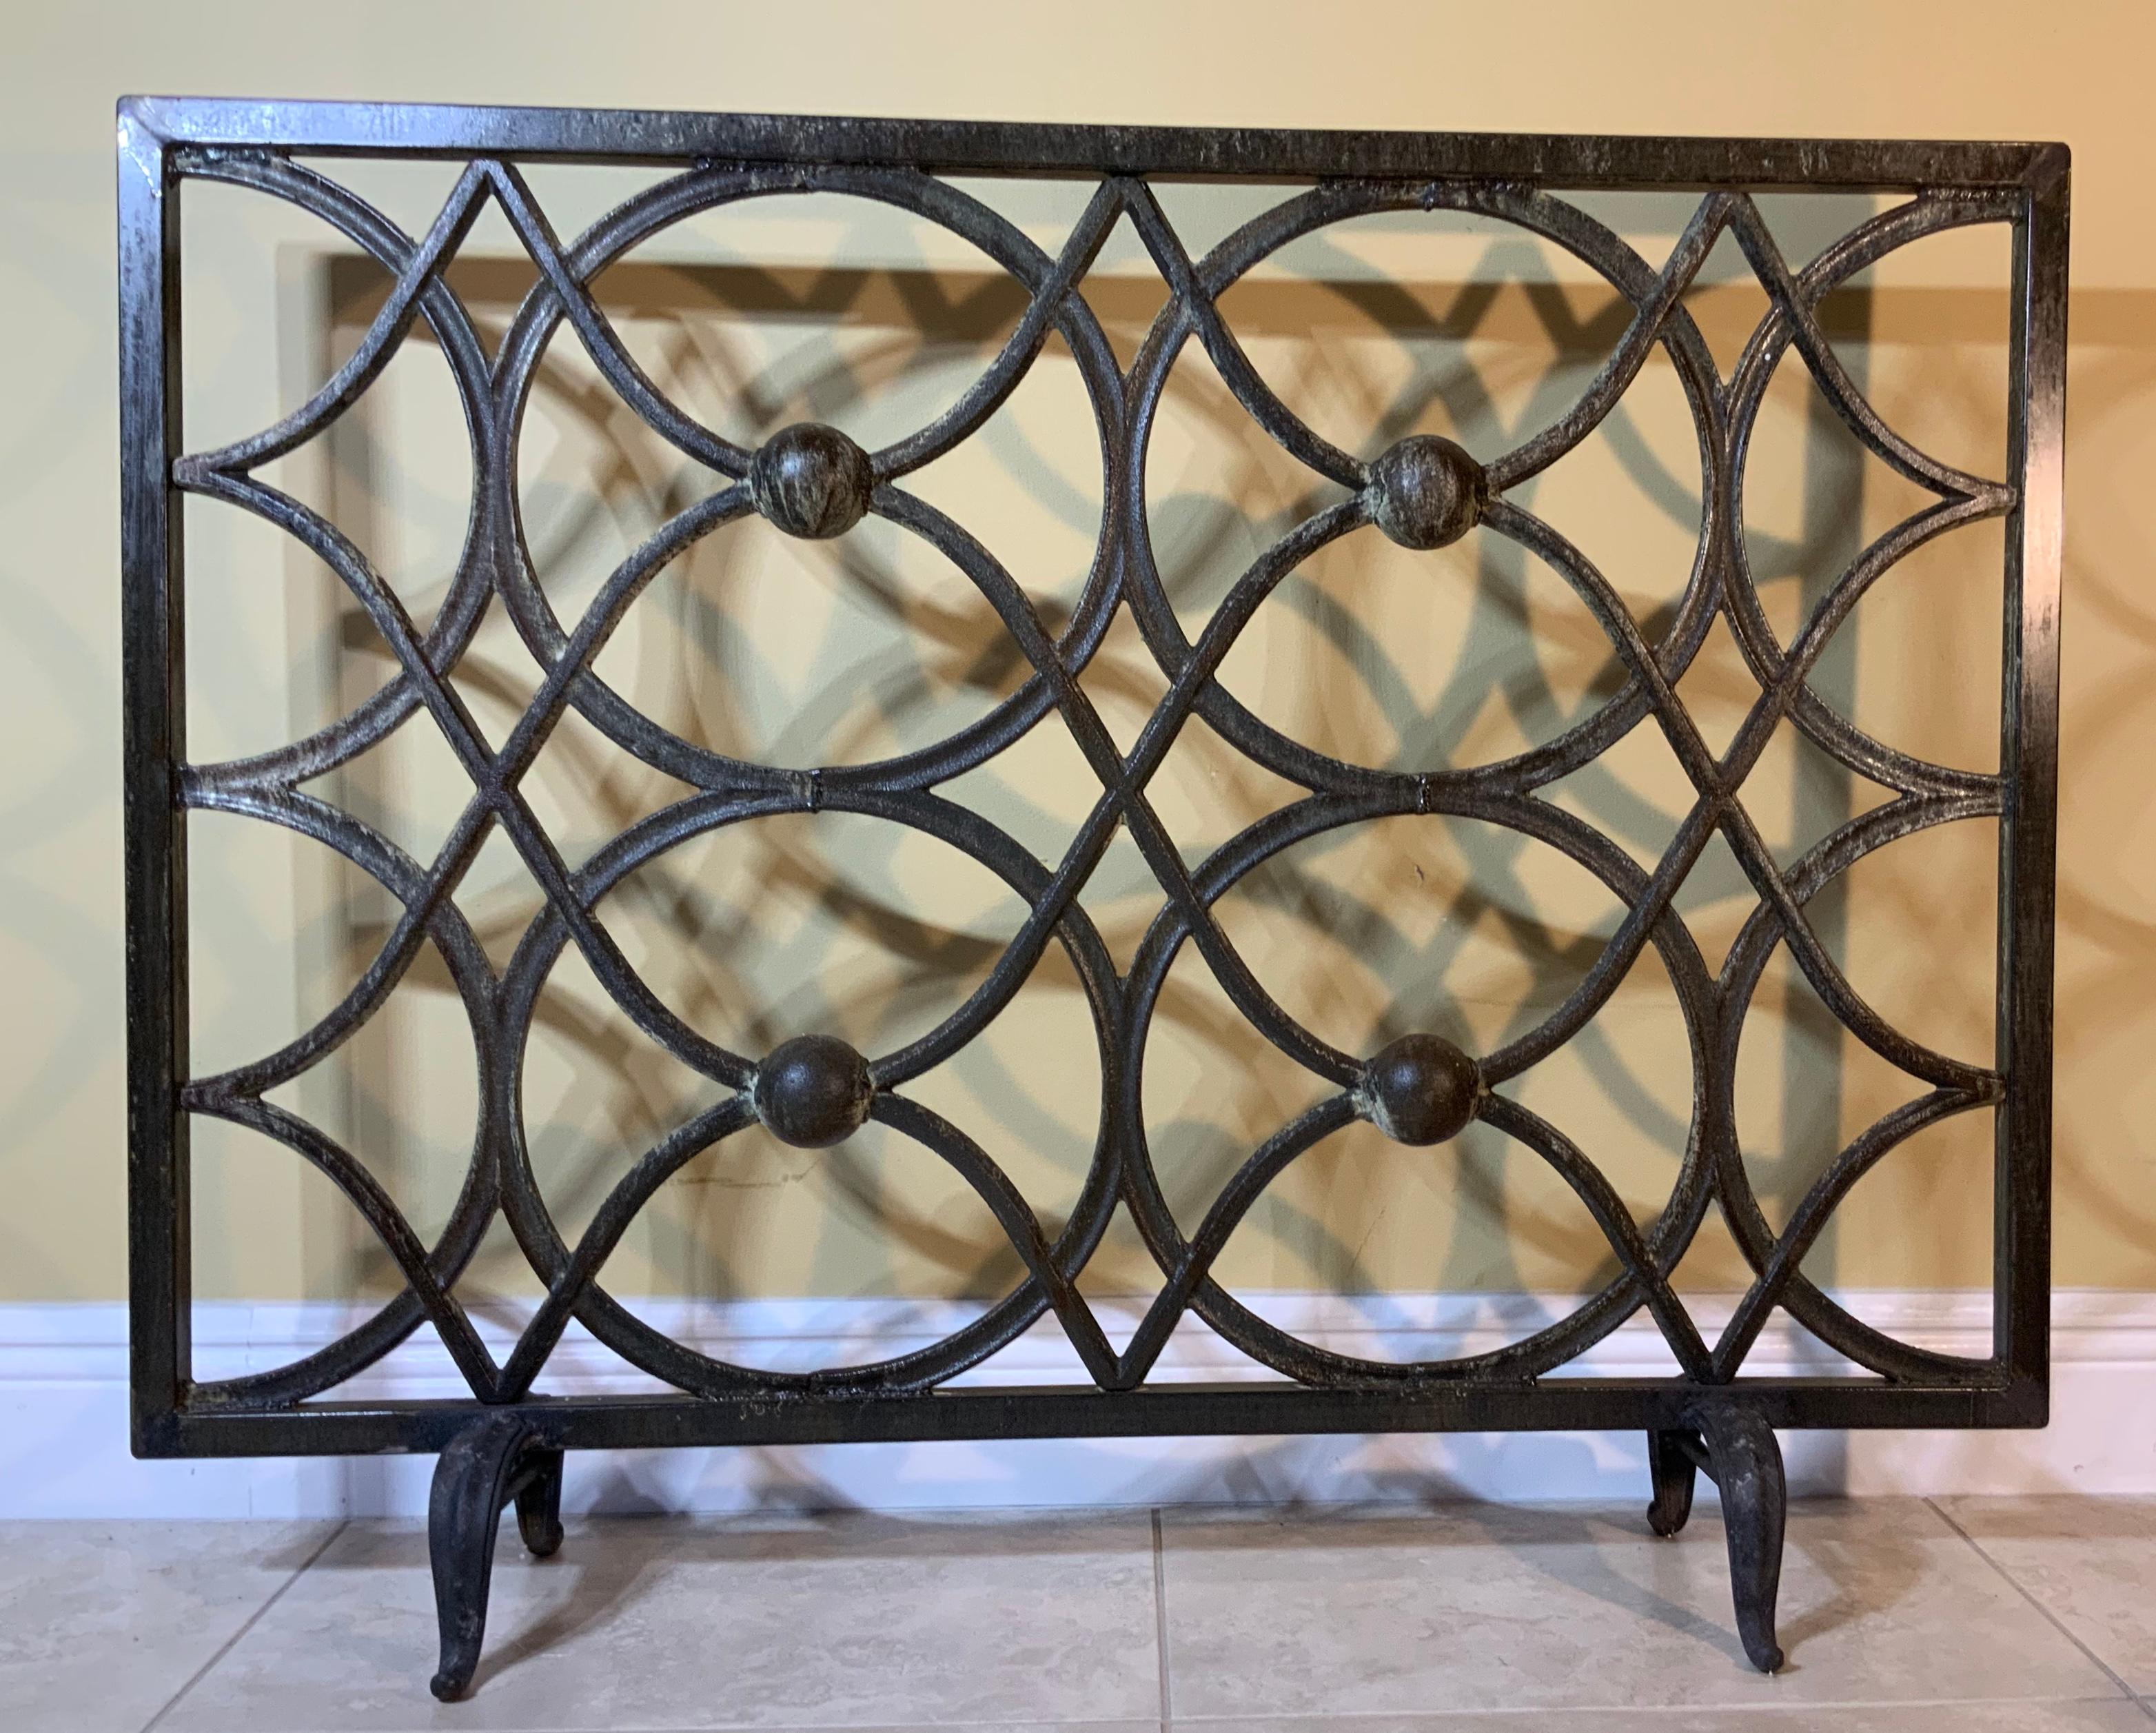 Elegant fireplace screen made of cast iron, artistic circular motif all around with great looking patina. Treated and sealed for rust.
Beautiful object of art for the fireplace.